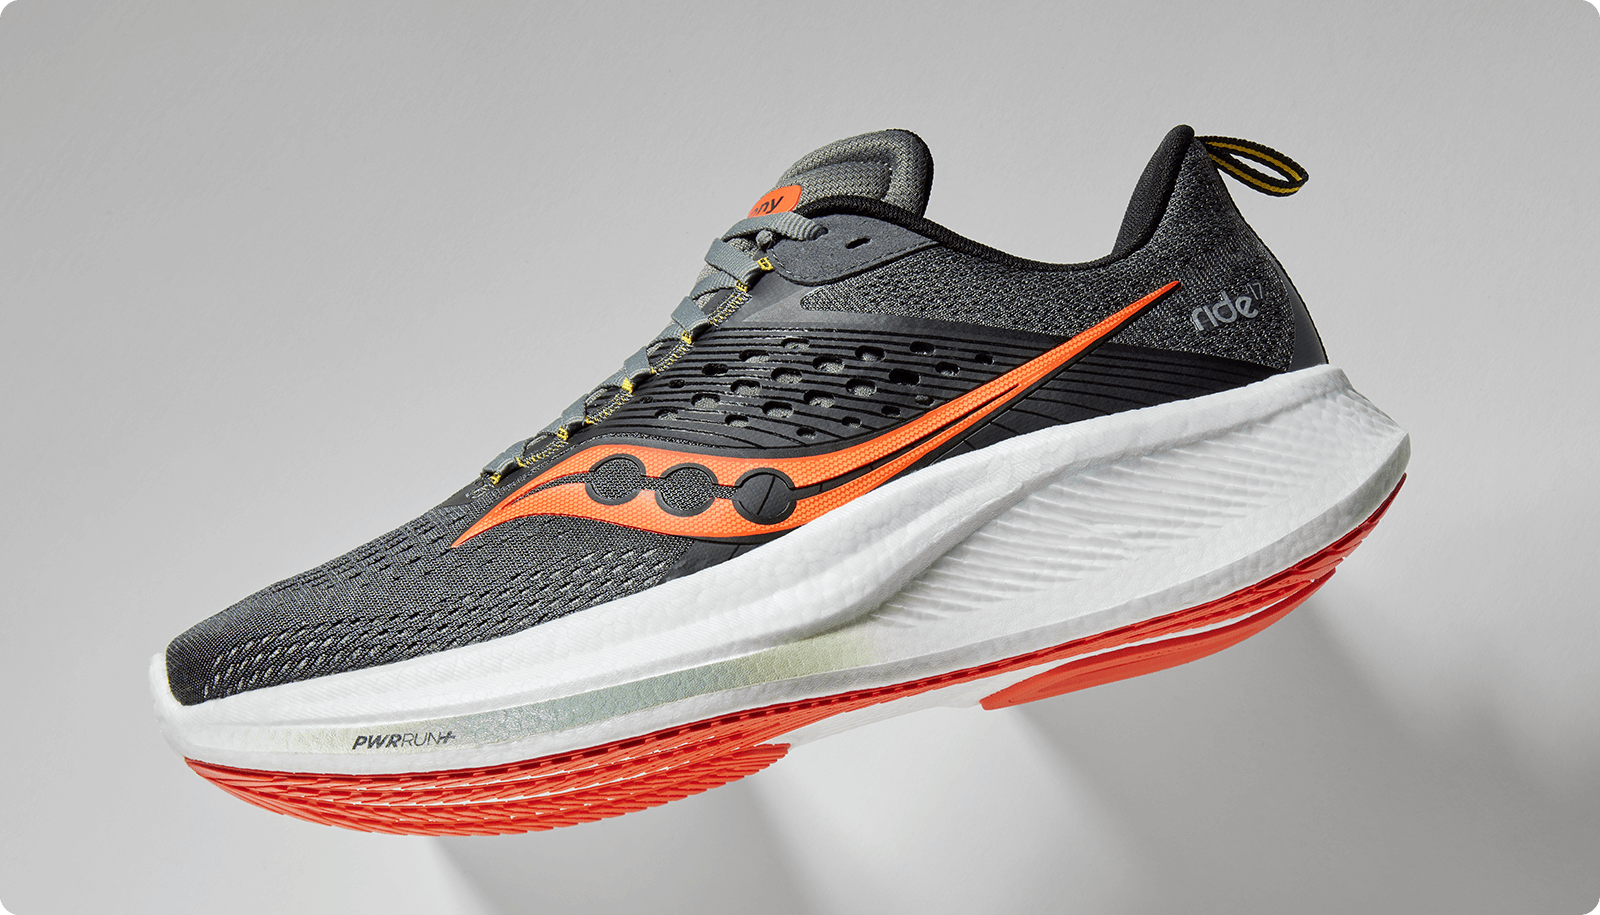 A close up of a Saucony Ride 17 running shoe.